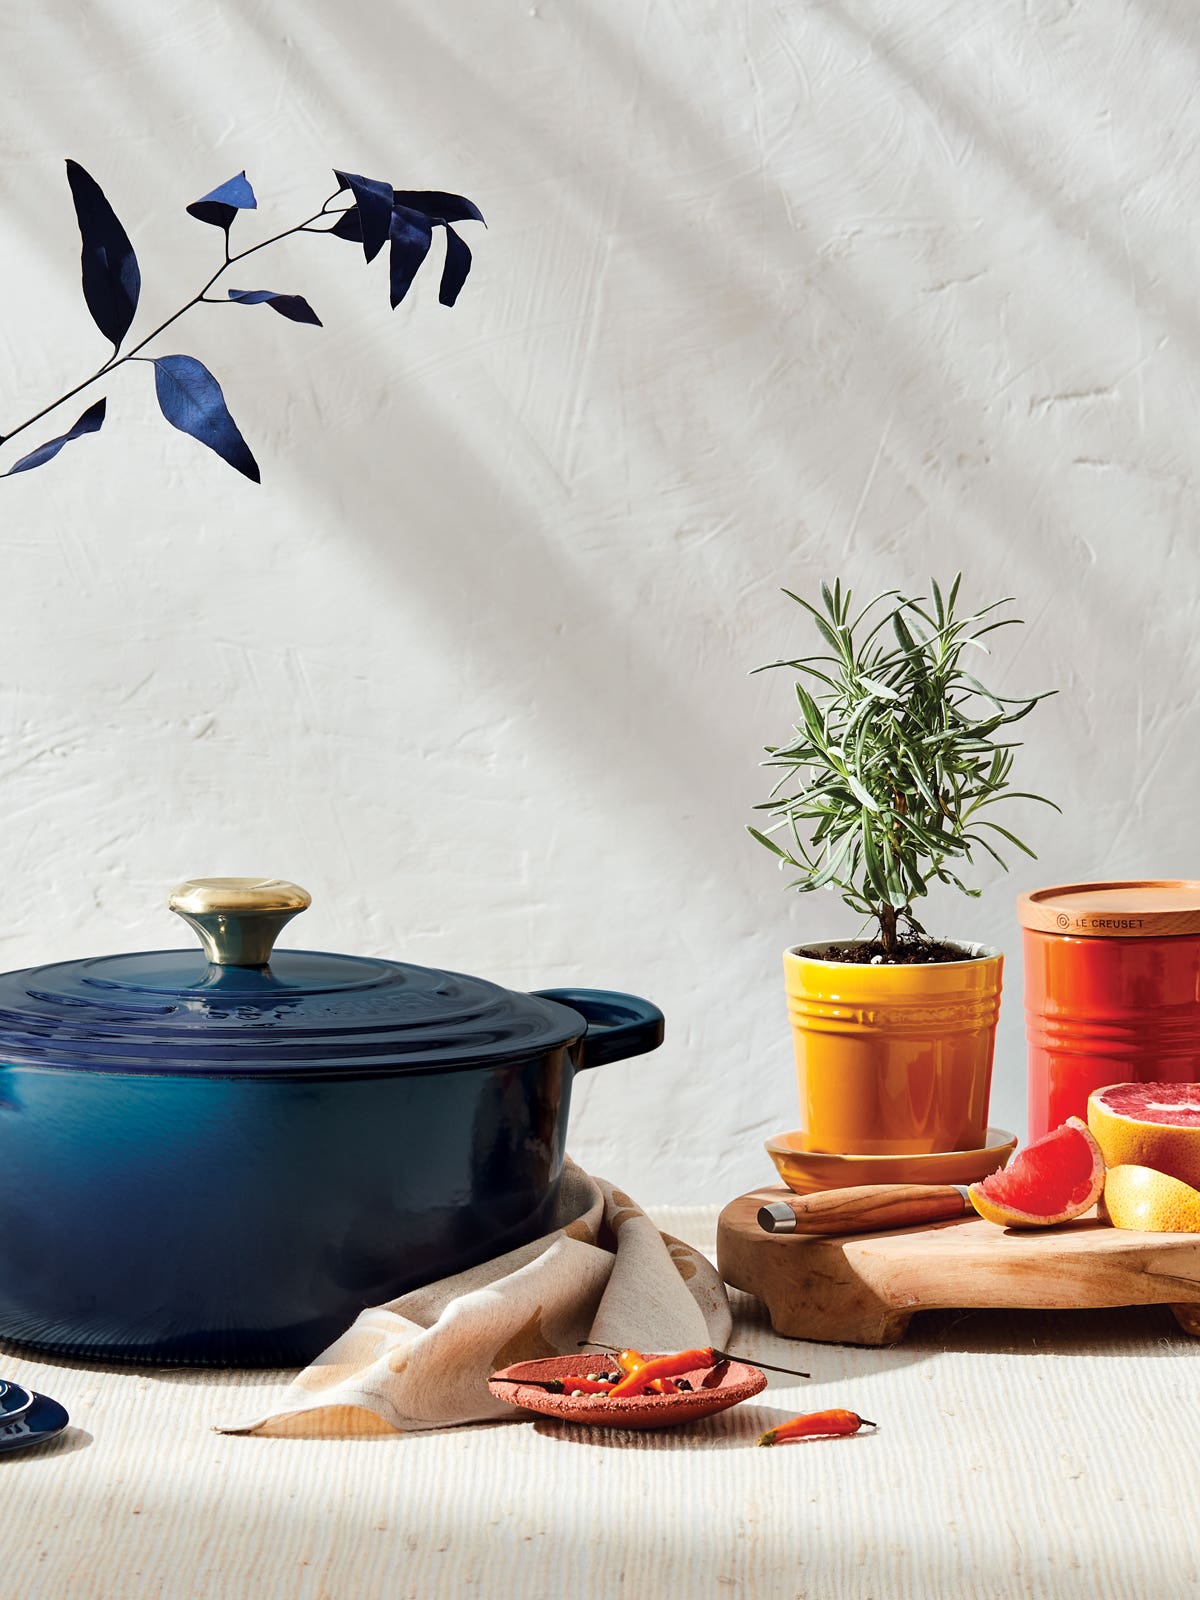 We Asked a Le Creuset Insider: What Colors Are You Betting On for 2021?